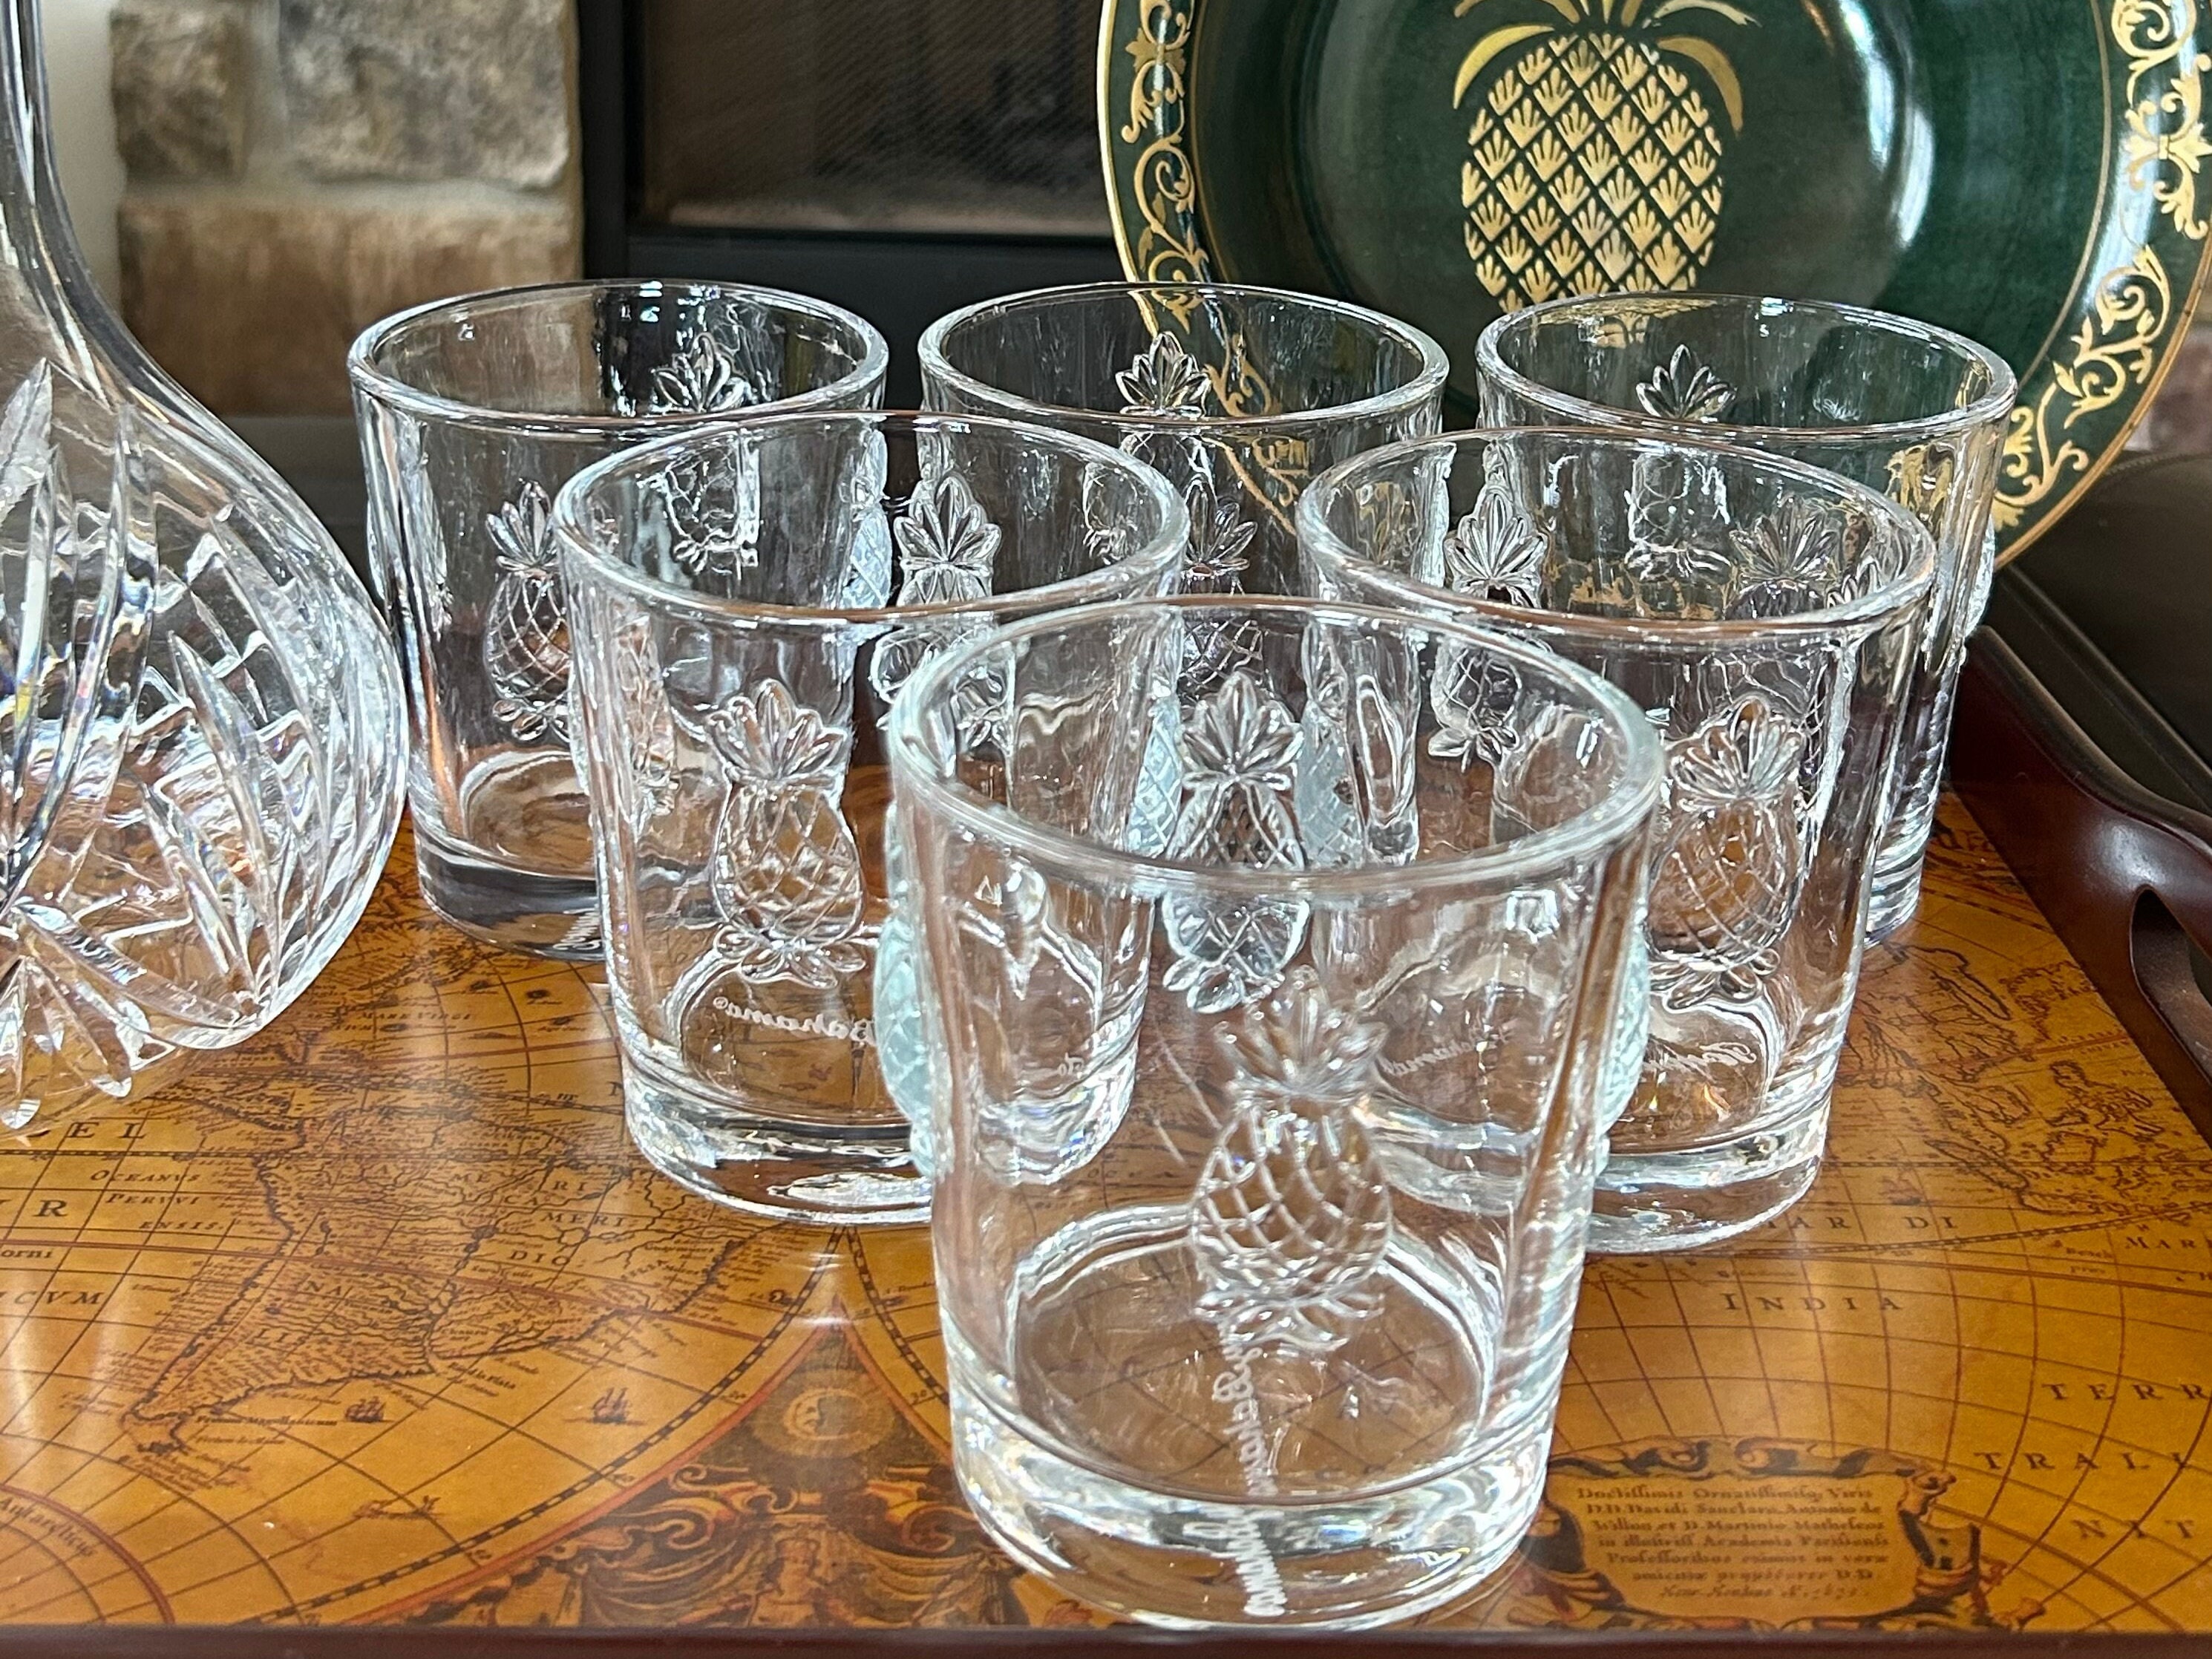 Pleat 12 Piece Double Old Fashion, Highball, & Goblet Glassware